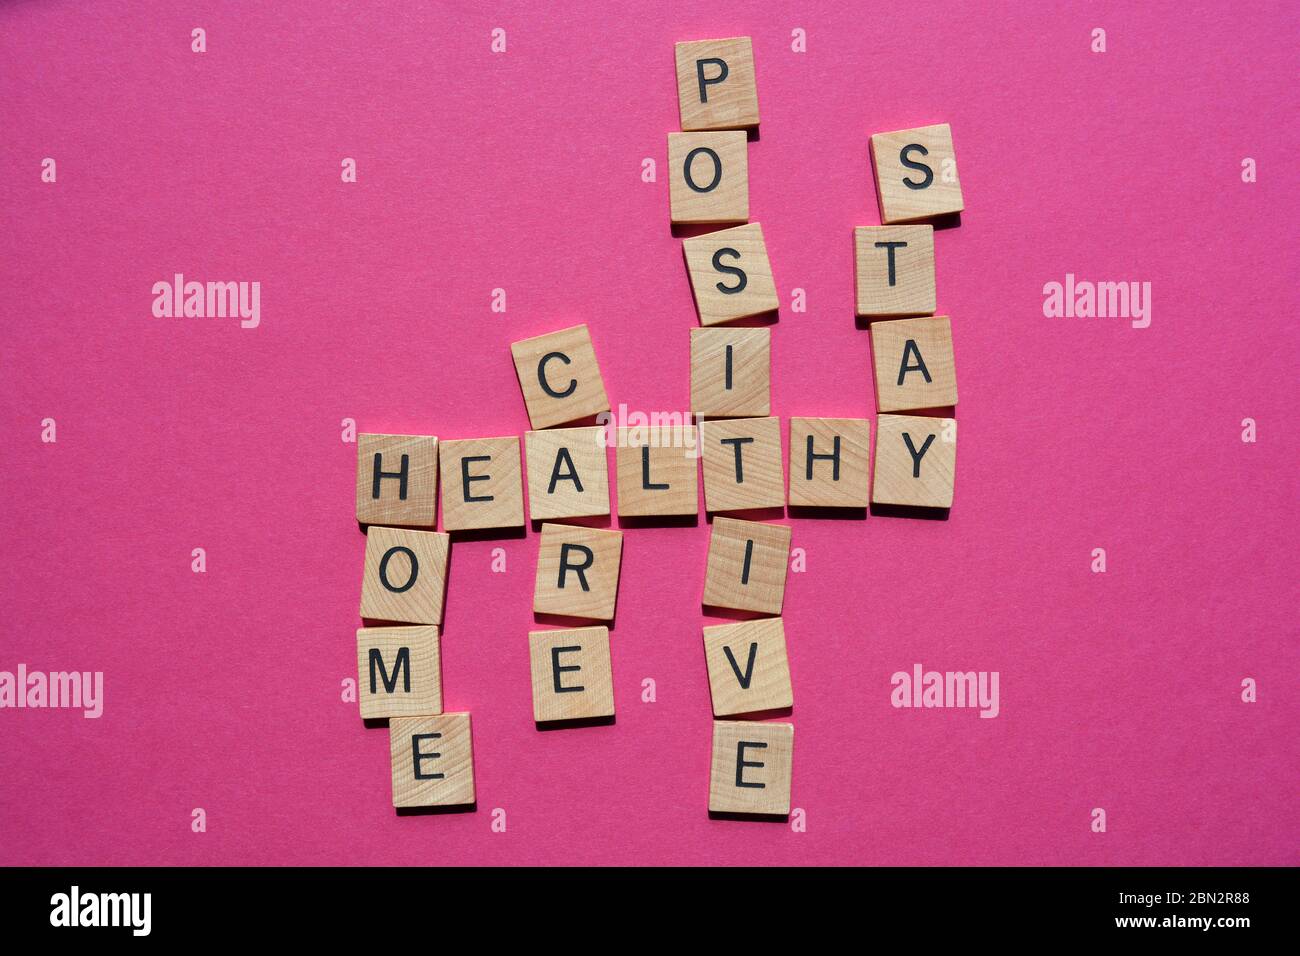 Positive, Home, Care, Stay, Healthy, crossword isolated on pink background Stock Photo